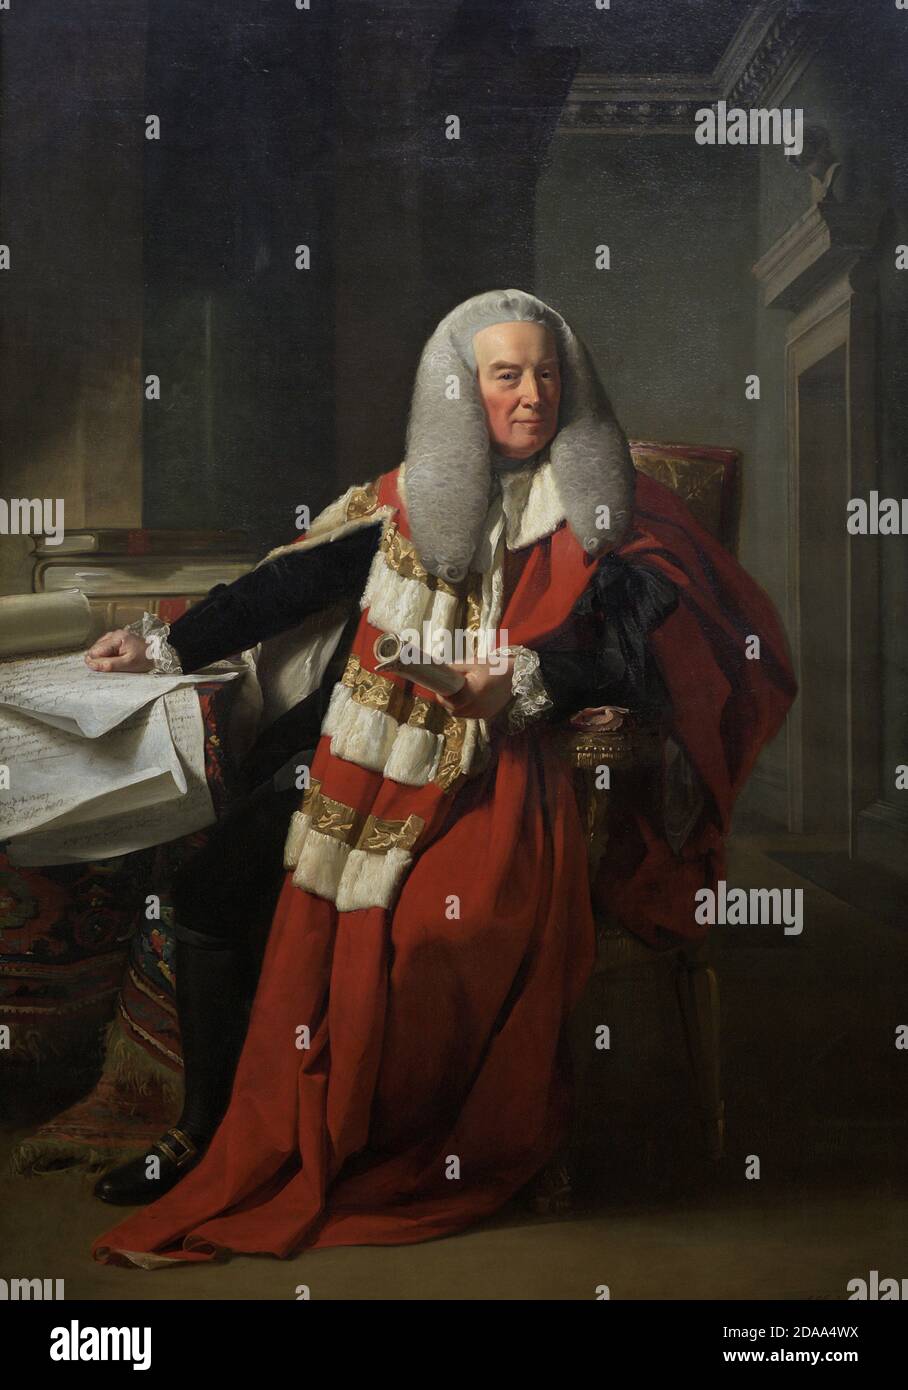 William Murray, 1st Earl of Mansfield (1705-1793). English jurist. In a pioneering judgement in 1772, he held that English Law did not recognise the state of slavery. Portrait by John Singleton Copley (1737-1815). Murray wearing his Peer's robes. Oil on canvas (227,6 x 149 cm), exhibited 1783. National Portrait Gallery. London, England, United Kingdom. Stock Photo